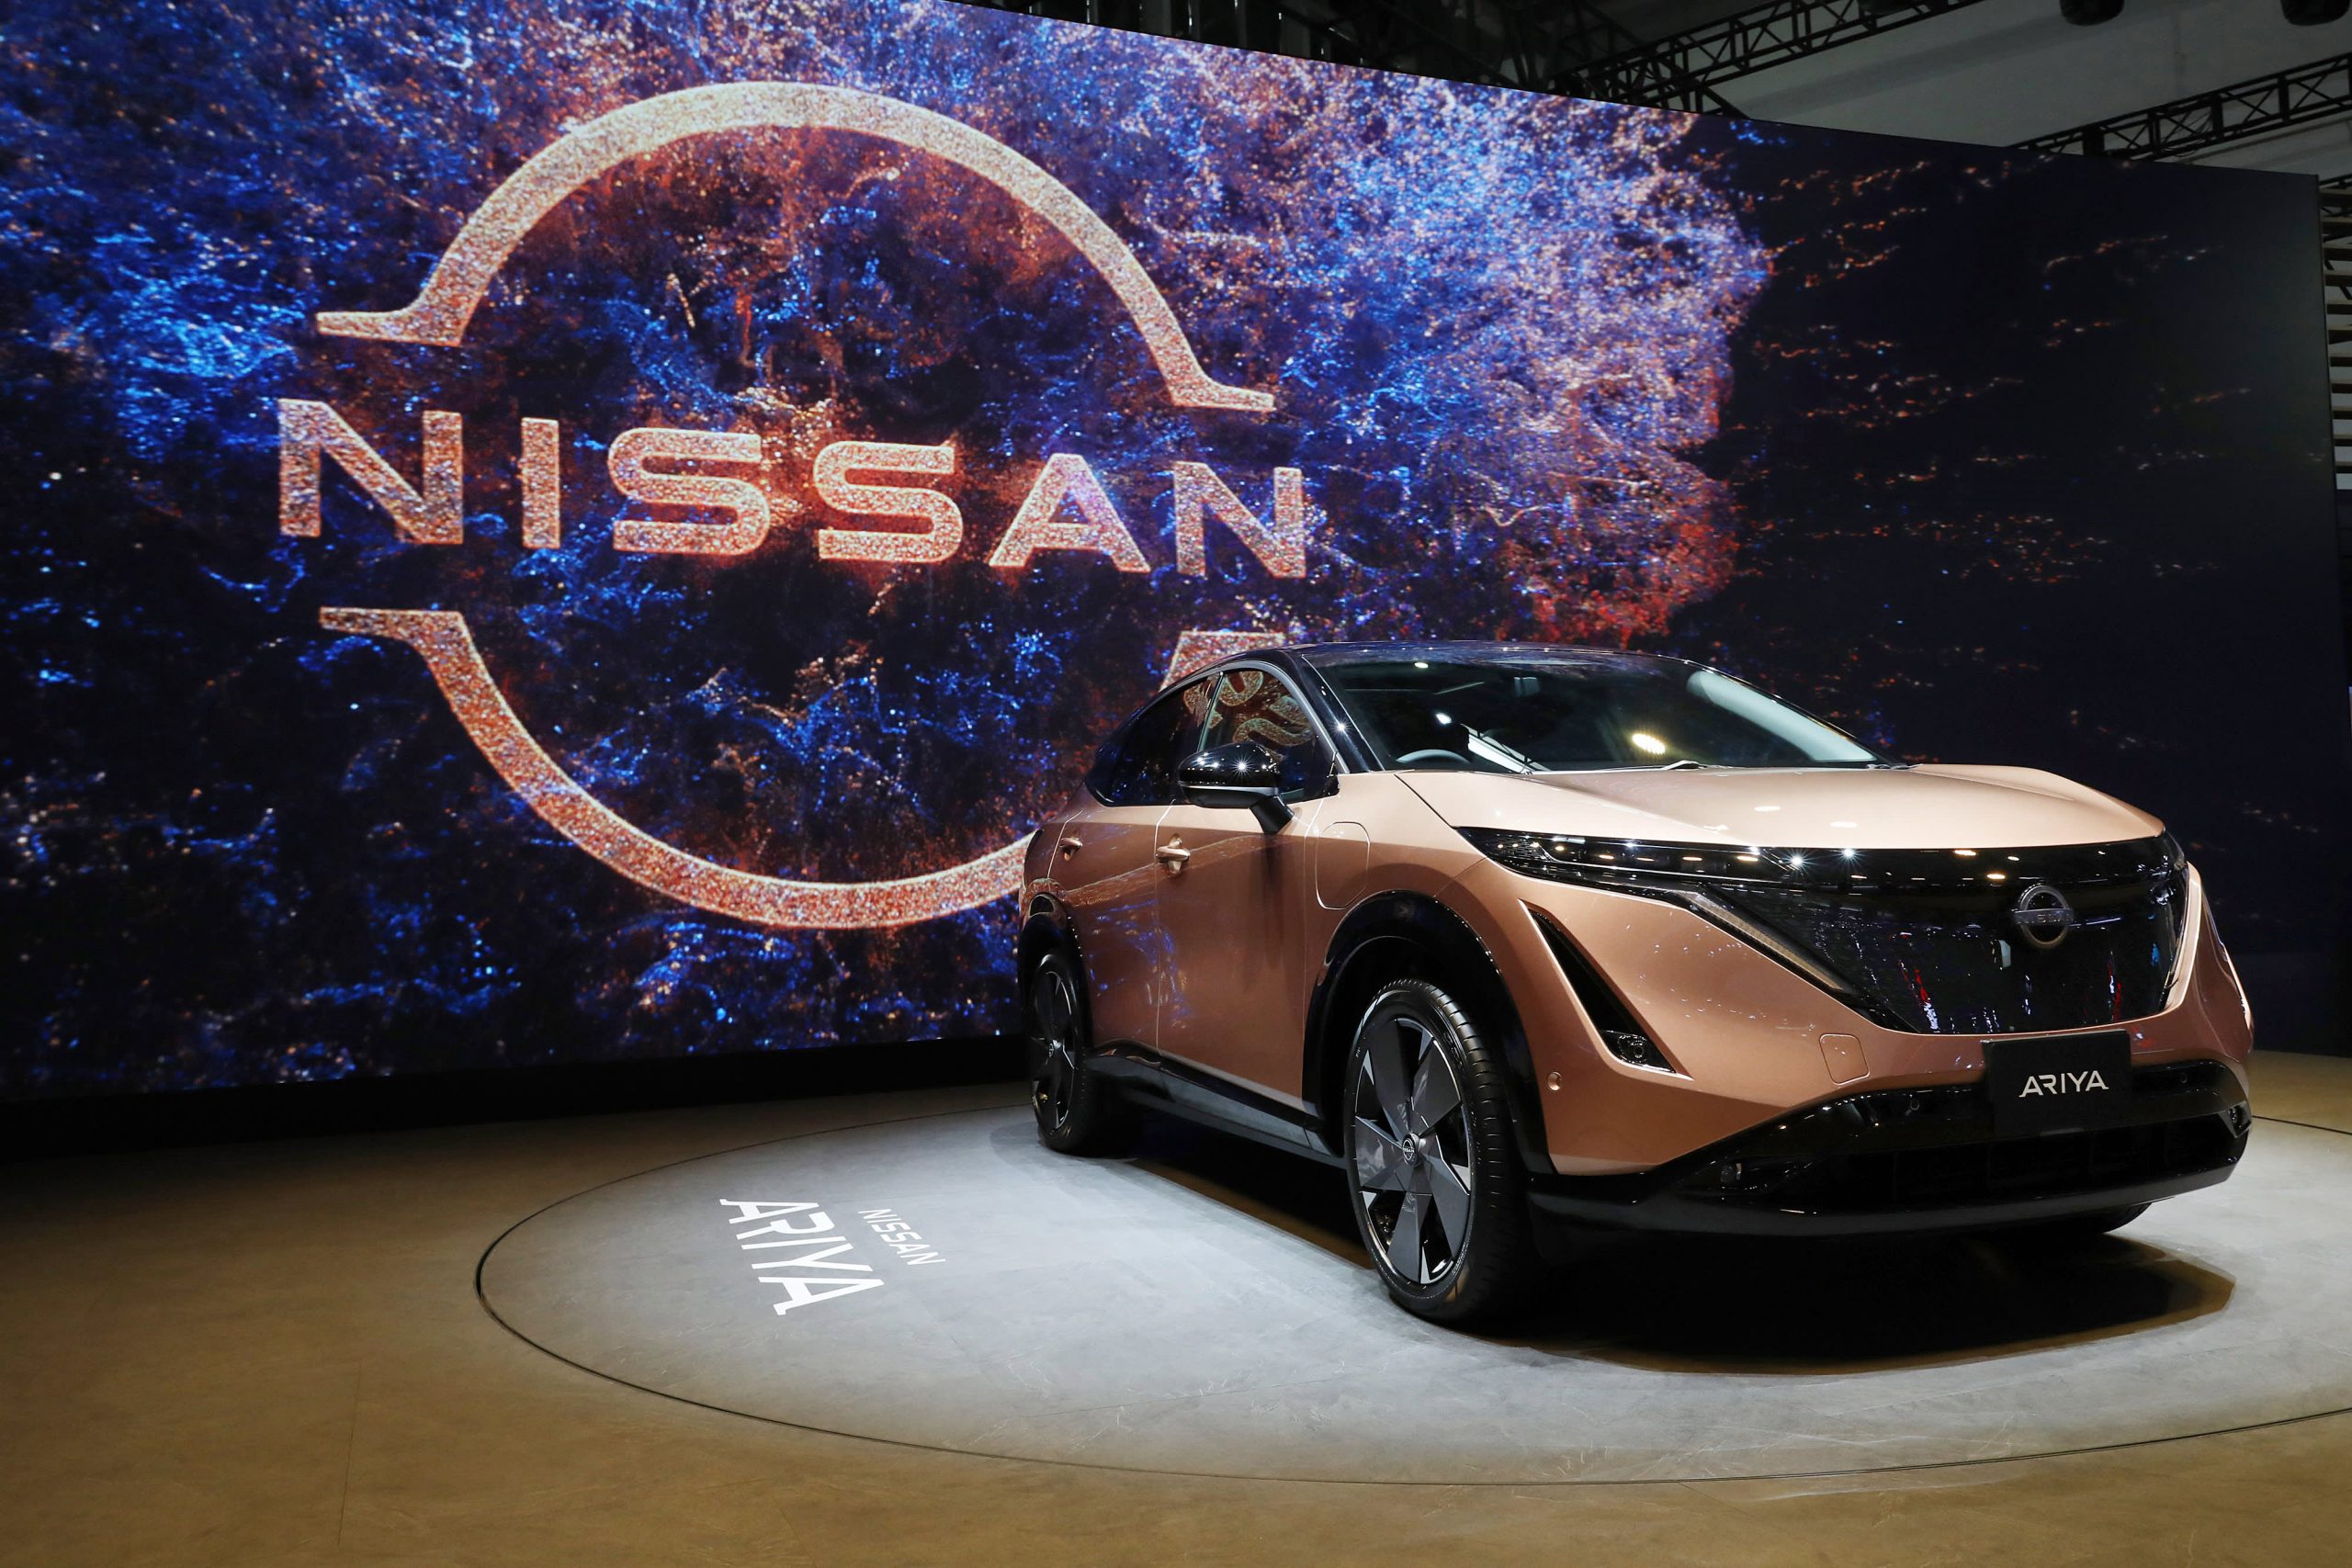 Nissan targets 1 million extra vehicle sales in next 3 years, aims to cut EV costs [Video]